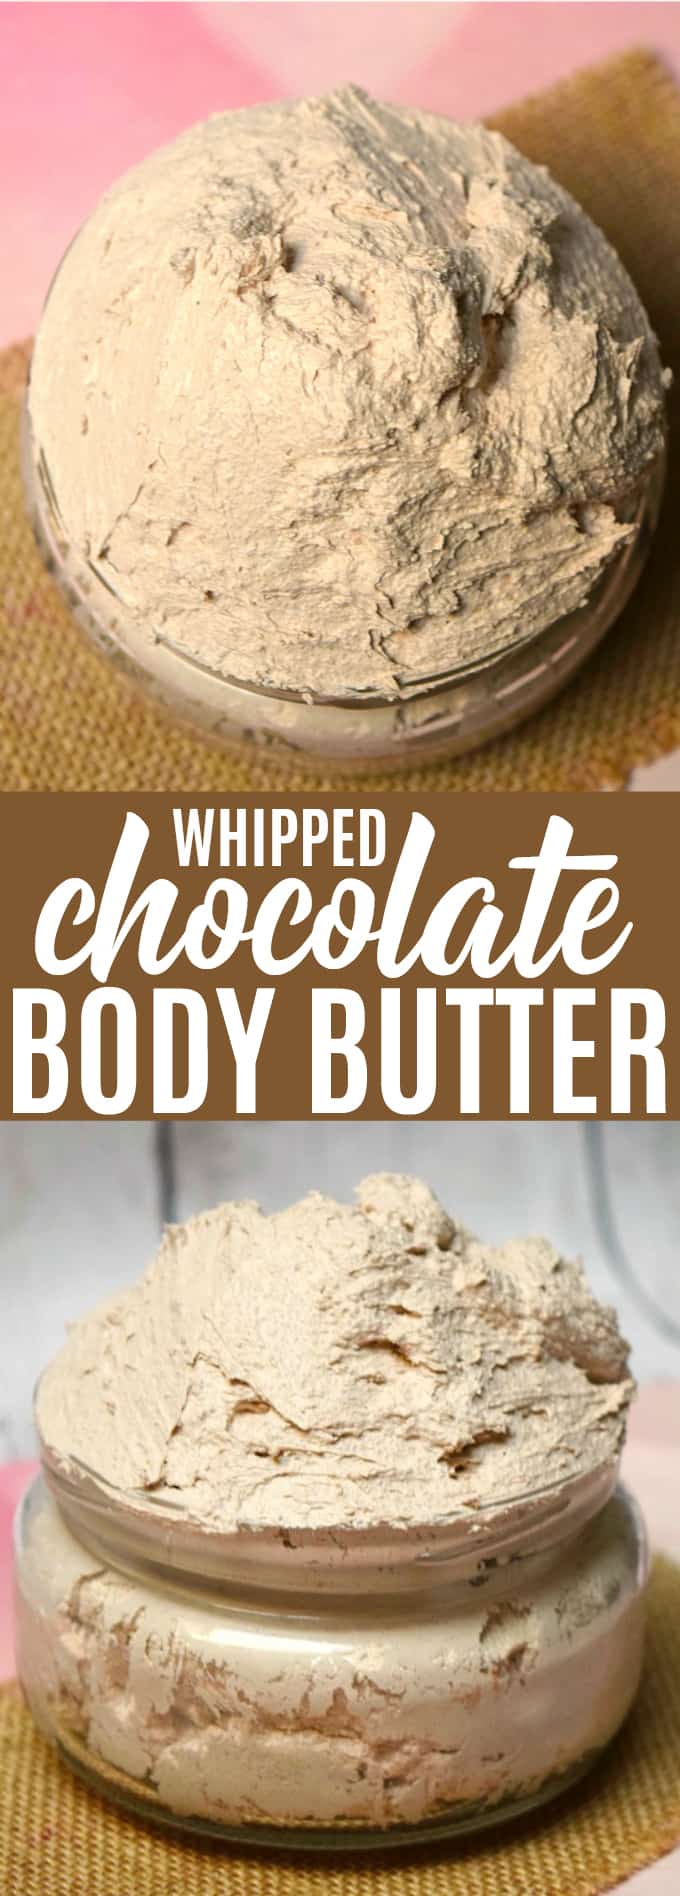 Whipped Chocolate Body Butter - light, fluffy and feels like heaven on your skin. Plus, it's made with only three ingredients!